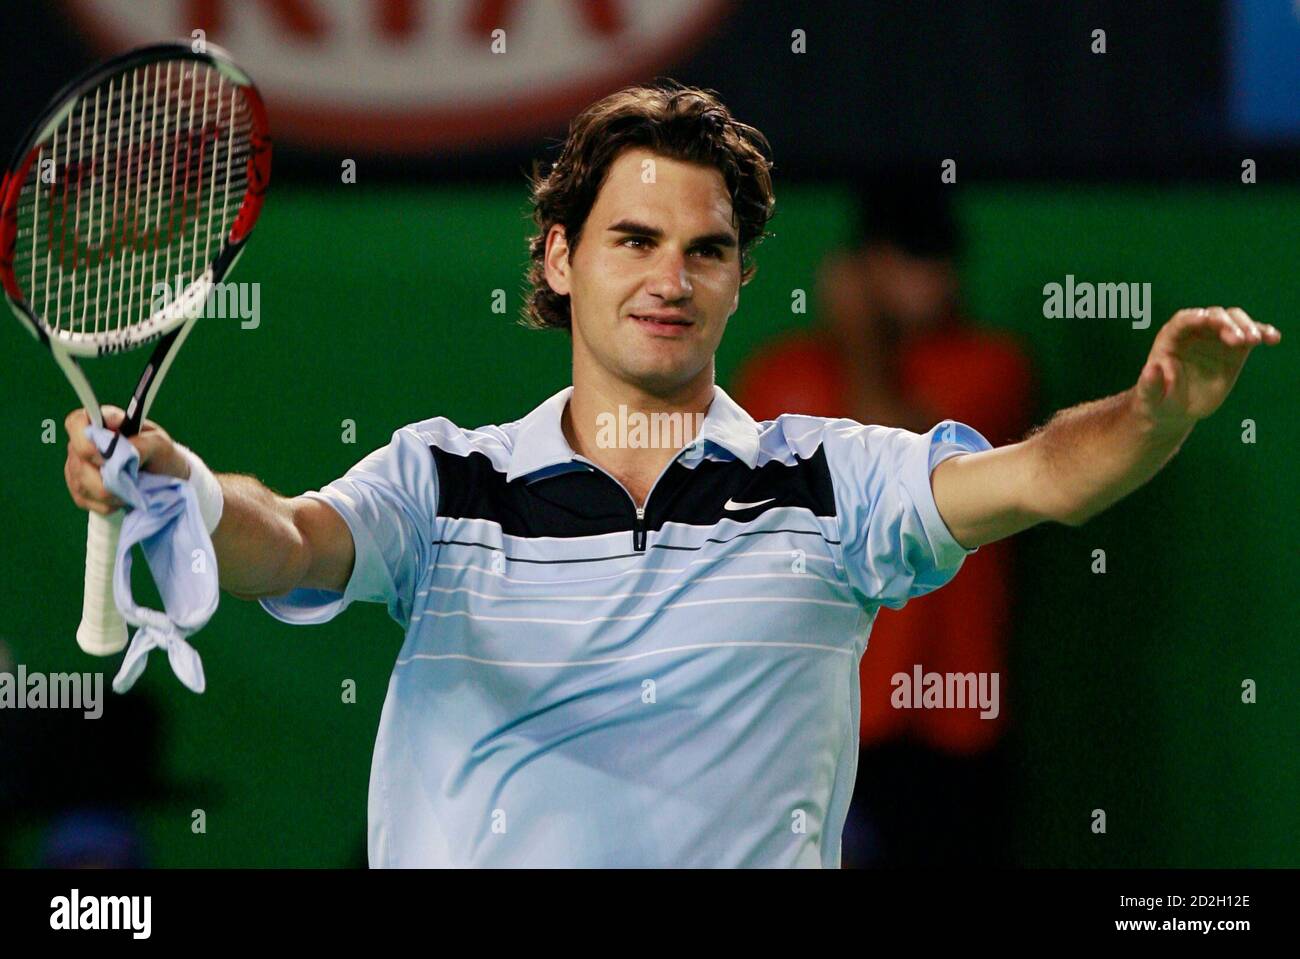 Switzerland's Roger Federer waves after winning his semi-final match  against Andy Roddick of the U.S. at the Australian Open tennis tournament  in Melbourne January 25, 2007. REUTERS/Darren Whiteside (AUSTRALIA Stock  Photo -